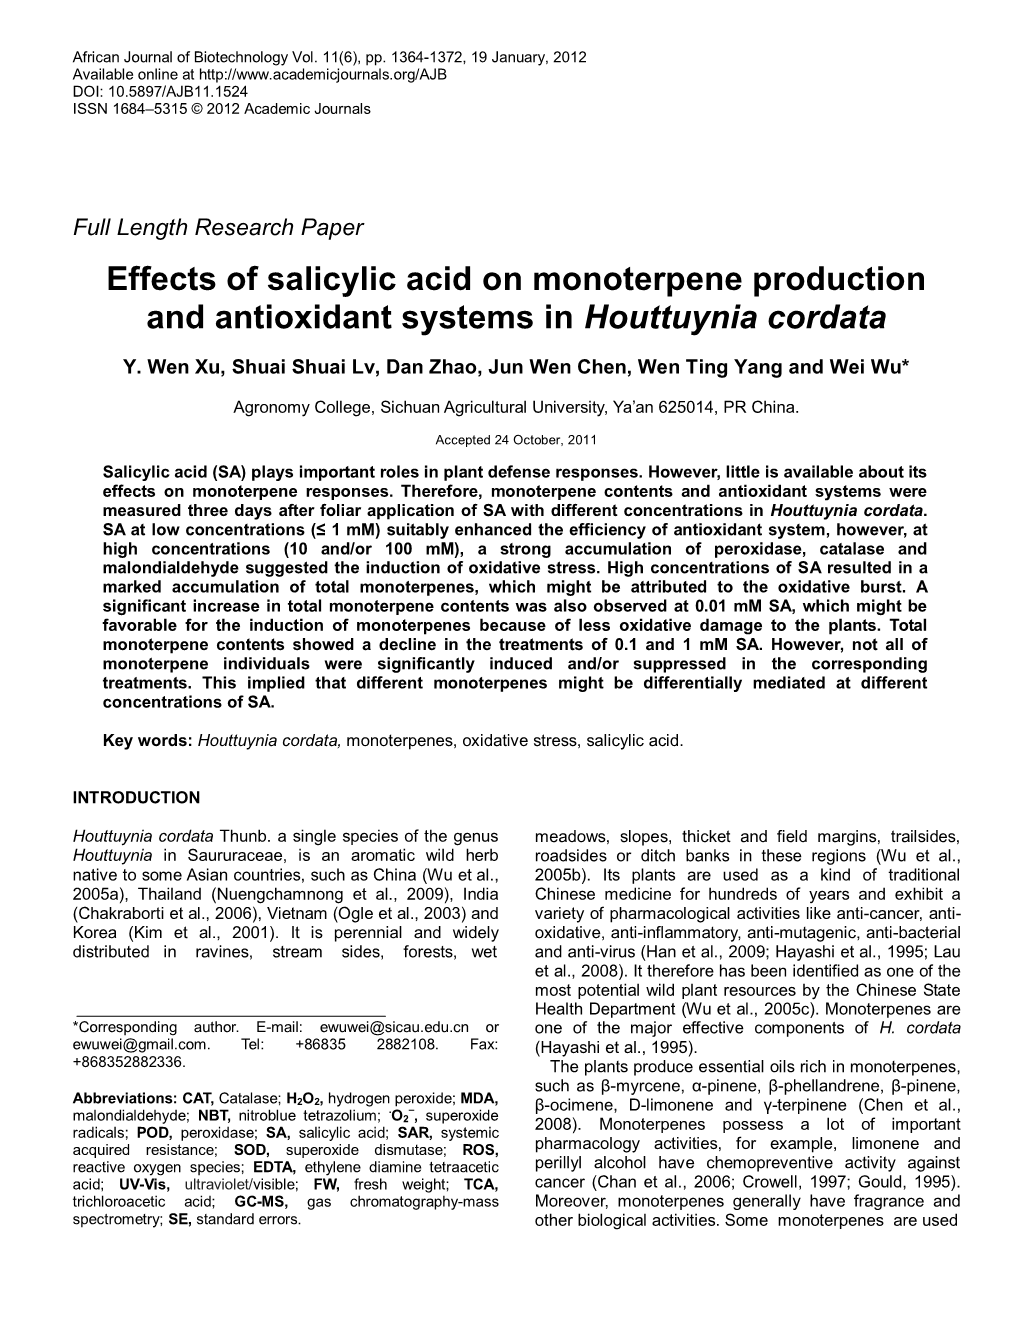 Effects of Salicylic Acid on Monoterpene Production and Antioxidant Systems in Houttuynia Cordata